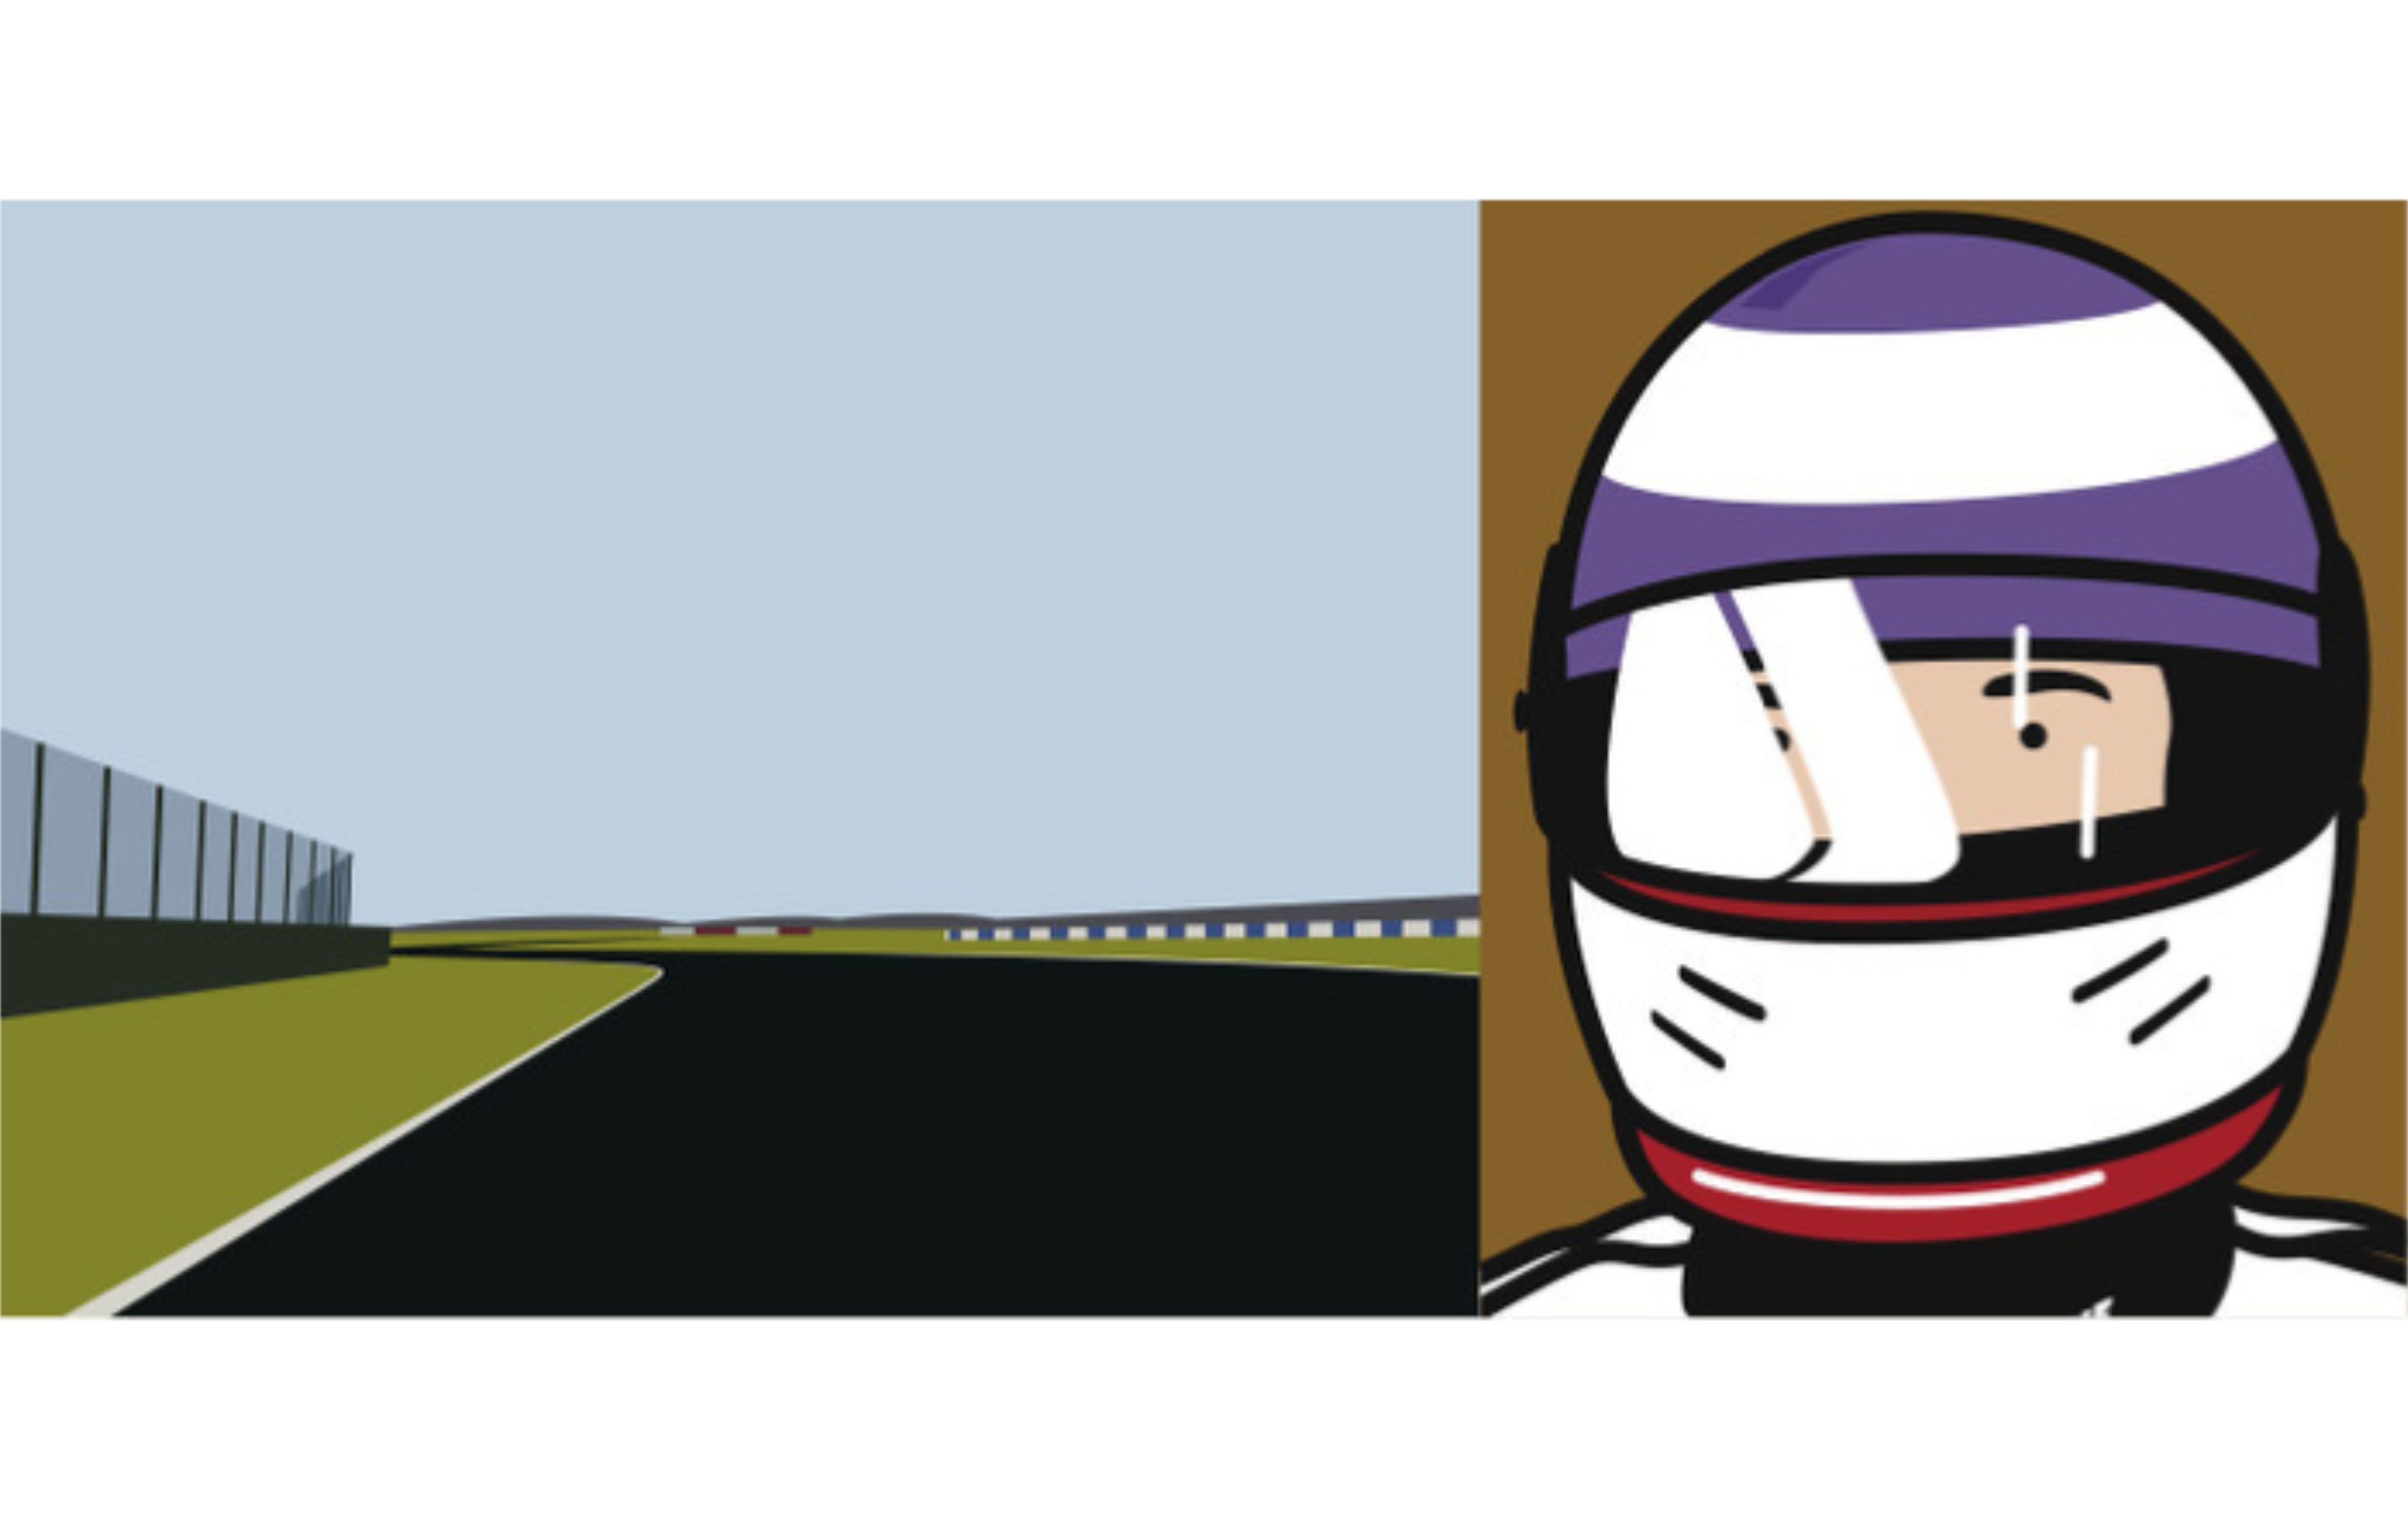 Imagine you are driving (fast)/Olivier w/helmet